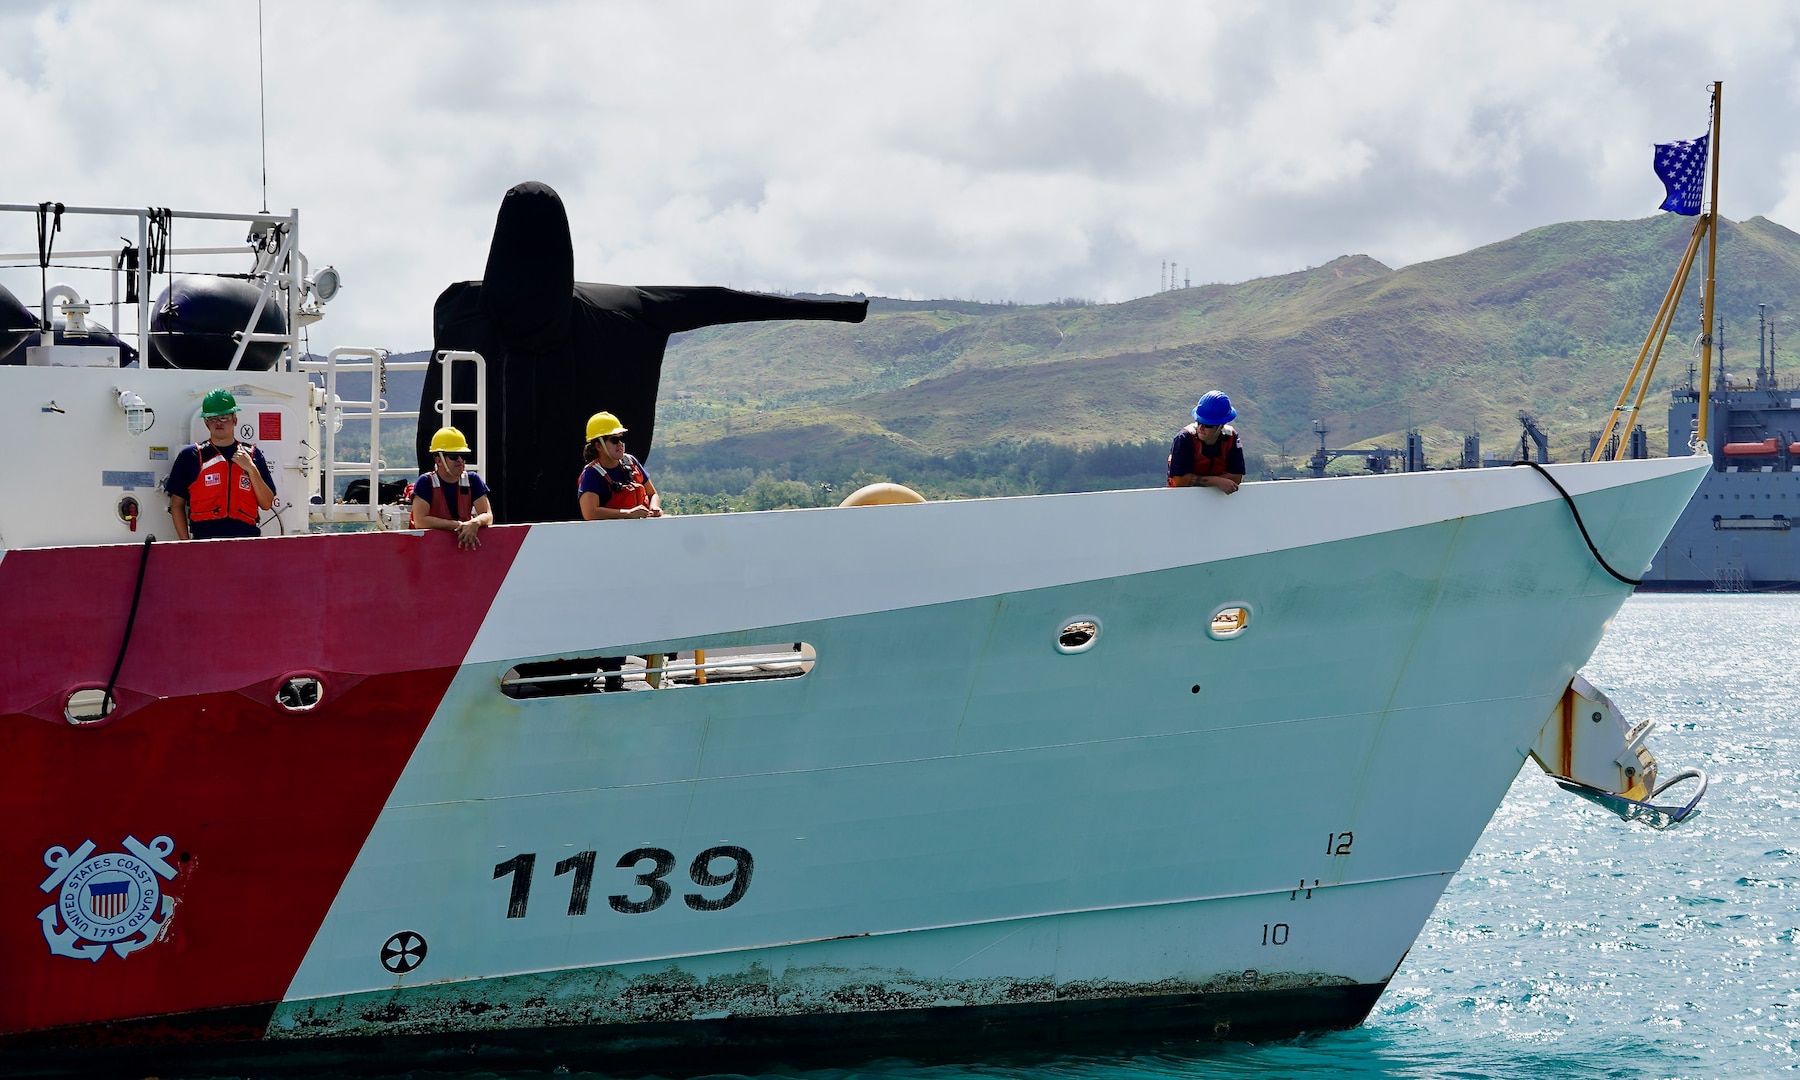 The USCGC Myrtle Hazard (WPC 1139) crew departs Guam for Honolulu on May 13, 2024, marking a significant milestone as the crew prepare for the first drydock maintenance period of approximately four and a half months. Commissioned in 2021, the Myrtle Hazard is the first of three Guam-based Fast Response Cutters to make the transit to Hawaii from Guam, traveling 3,743 miles to undergo this crucial maintenance phase. (U.S. Coast Guard photo by Chief Warrant Officer Sara Muir)